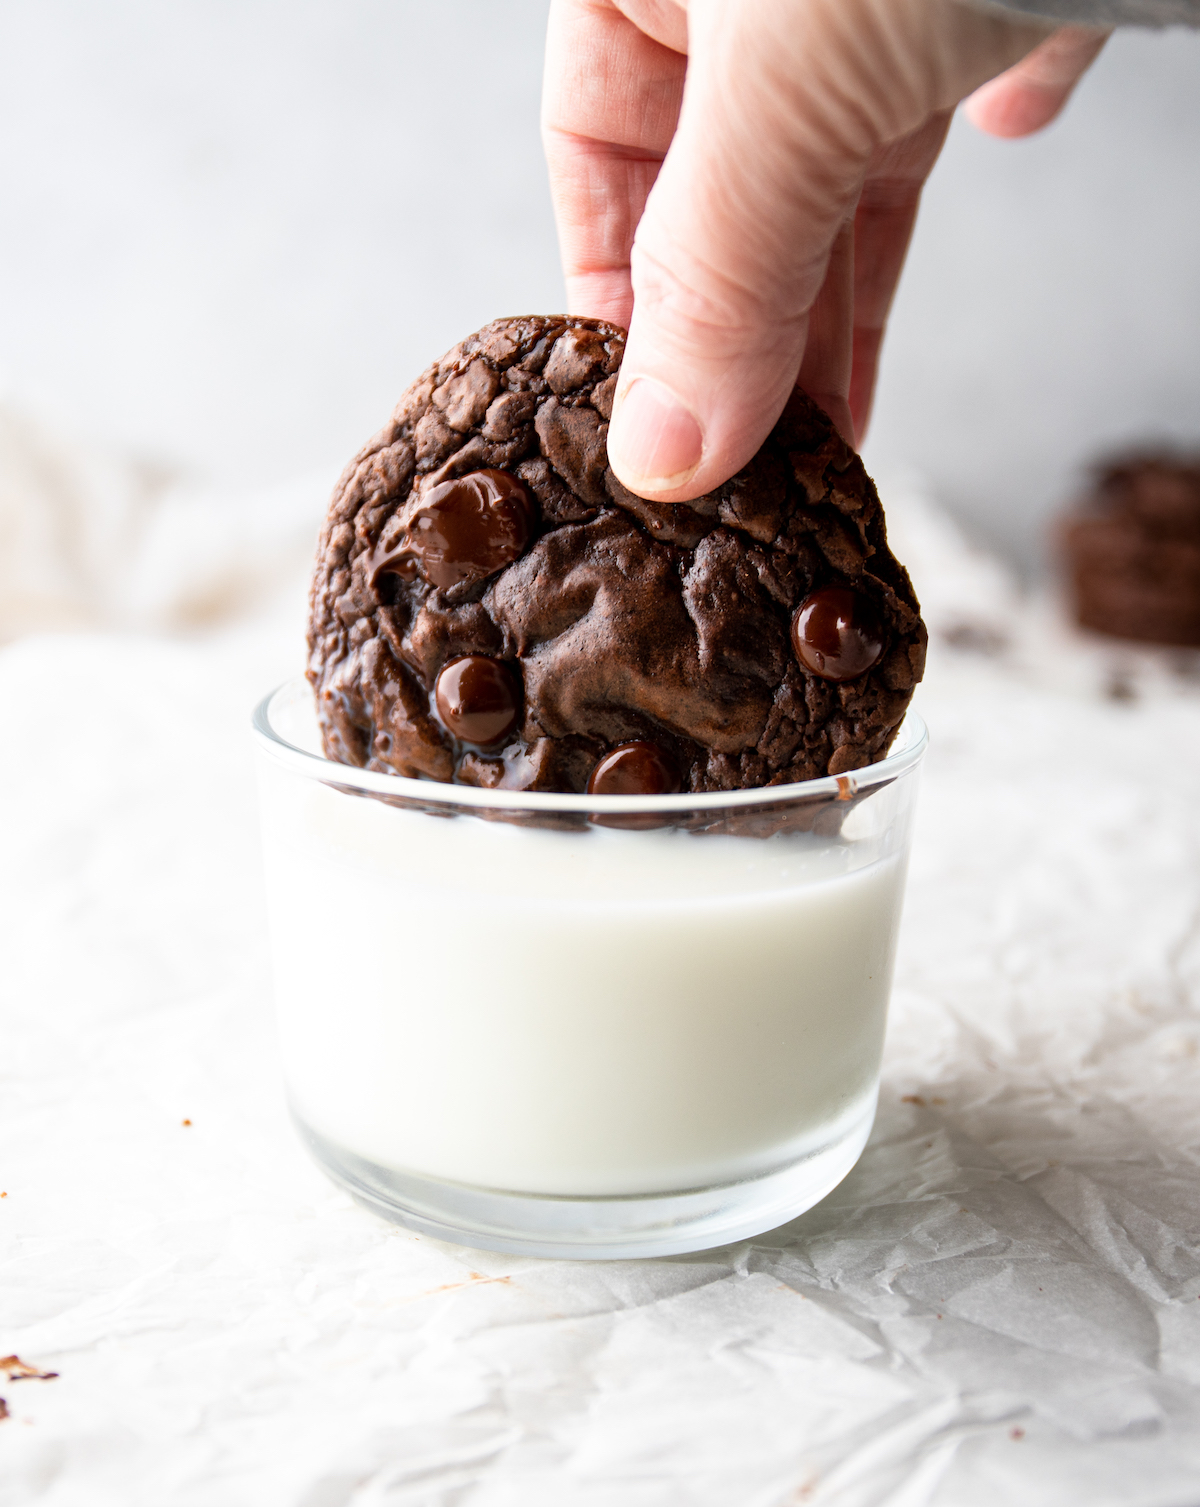 A hand dipping a chocolate cookie in a glass of milk.